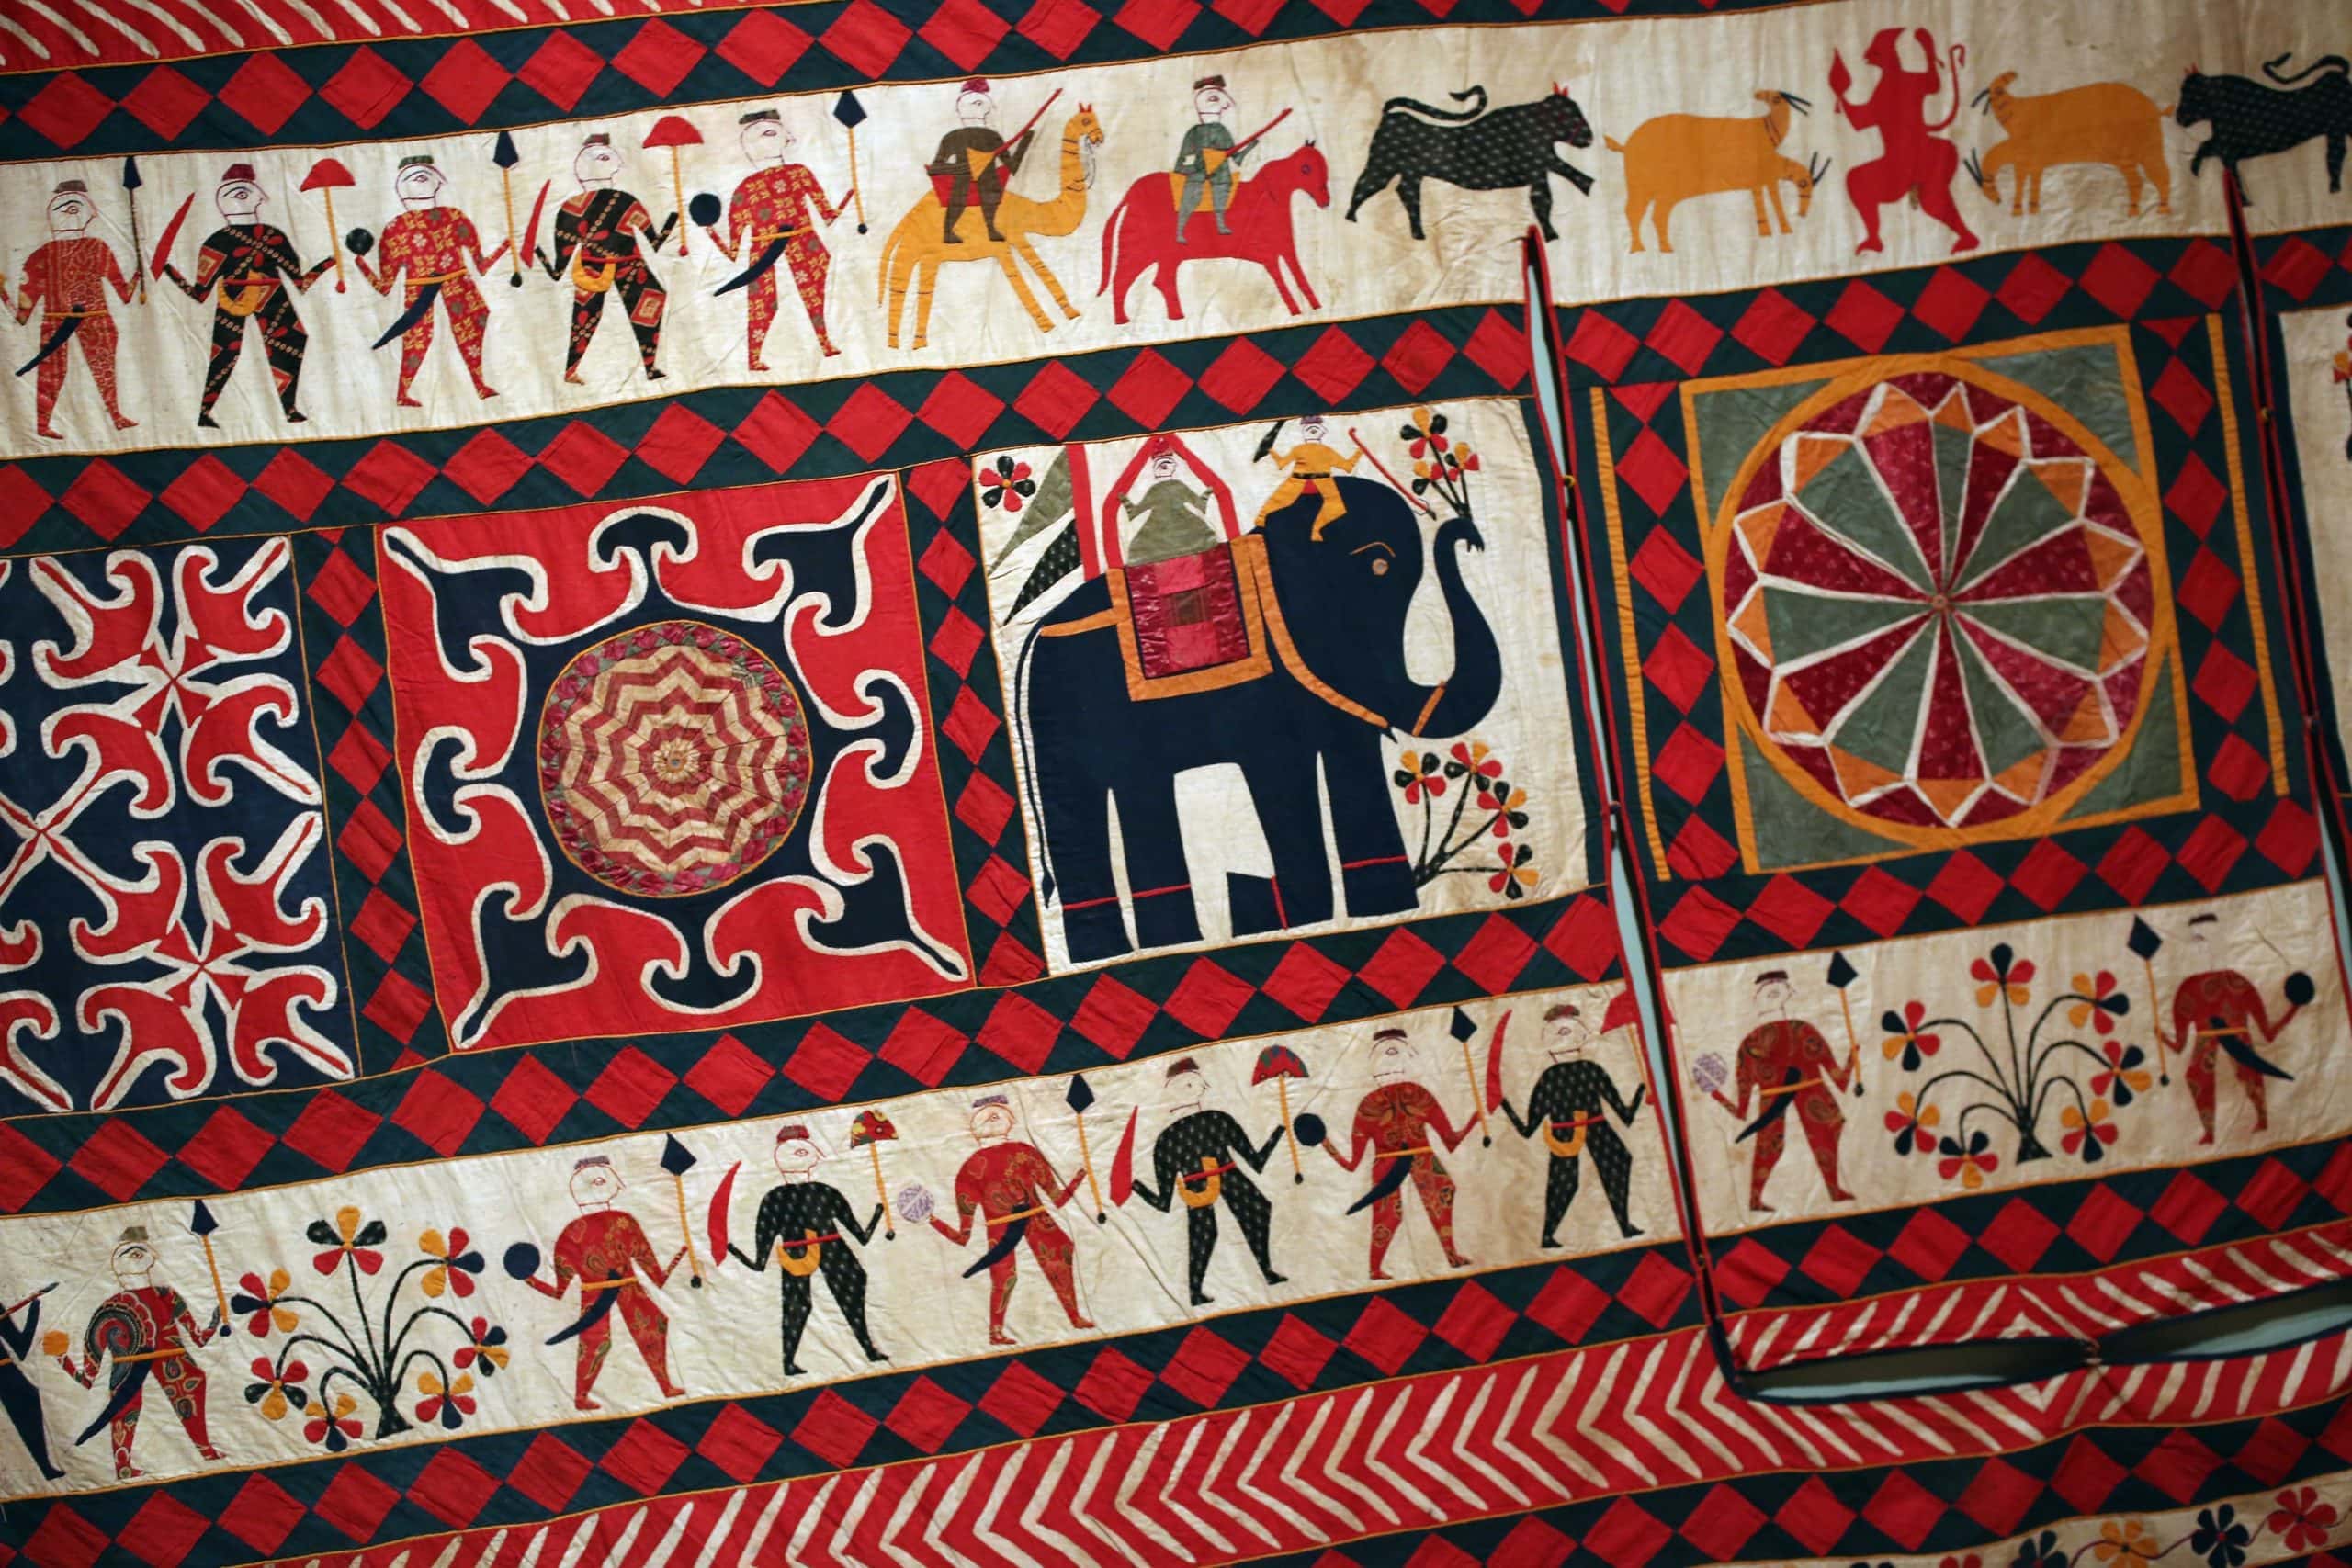 The V&A Museum Opens Its Autumn Exhibtion - The Fabric Of India